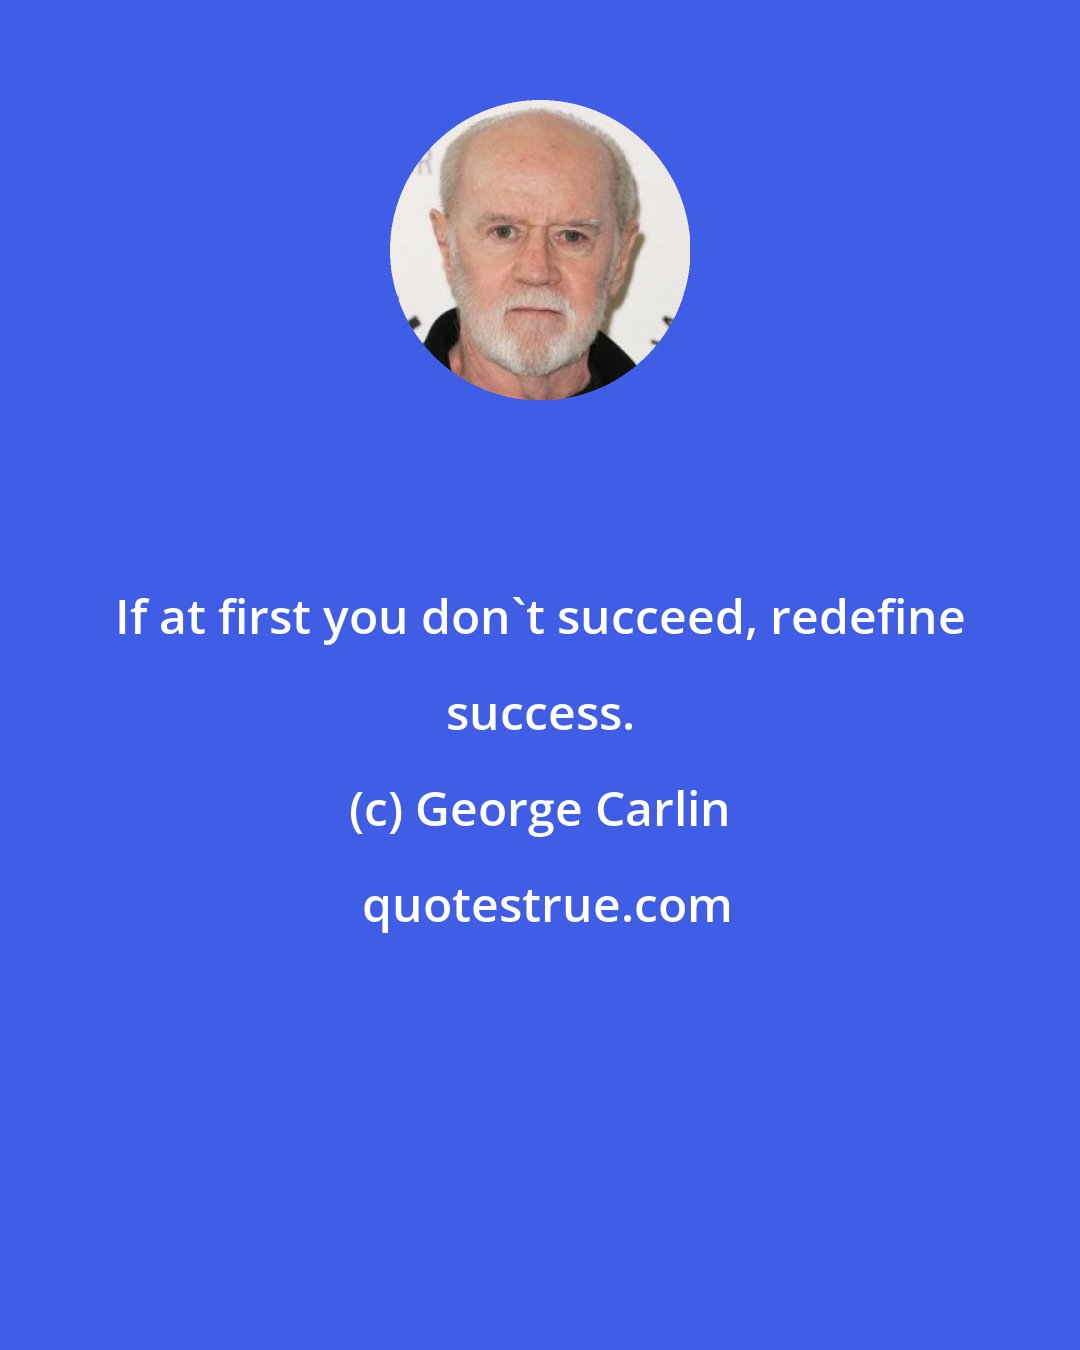 George Carlin: If at first you don't succeed, redefine success.